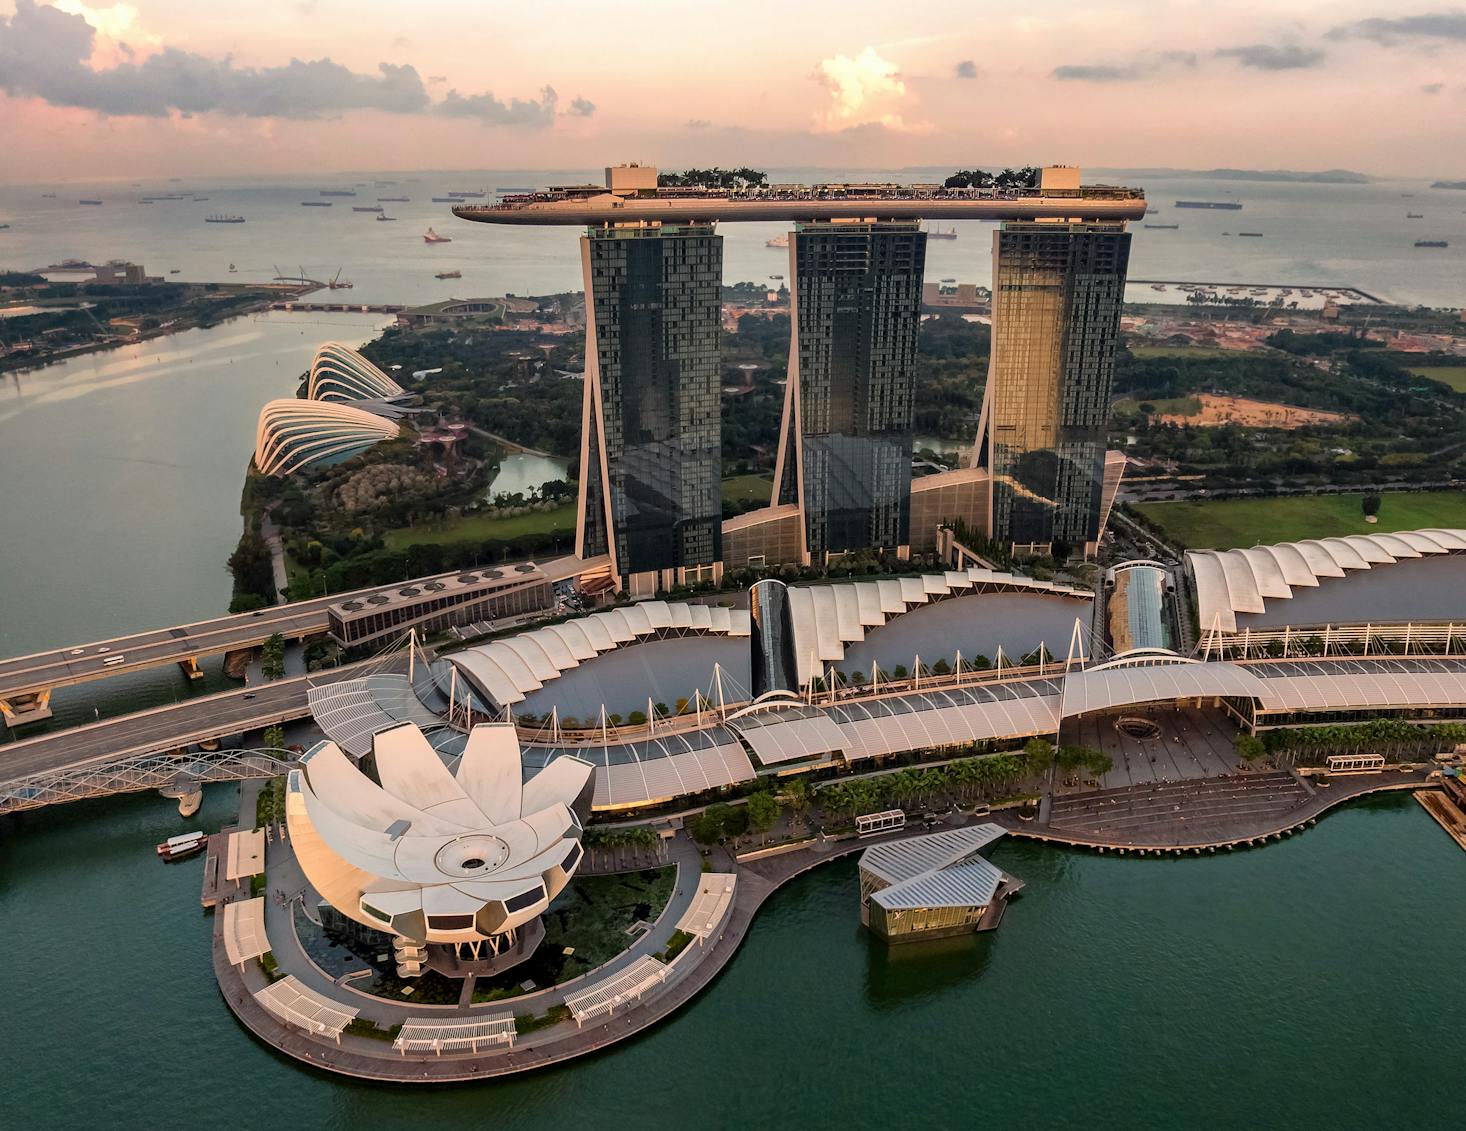 Budget travel tips for visiting Singapore